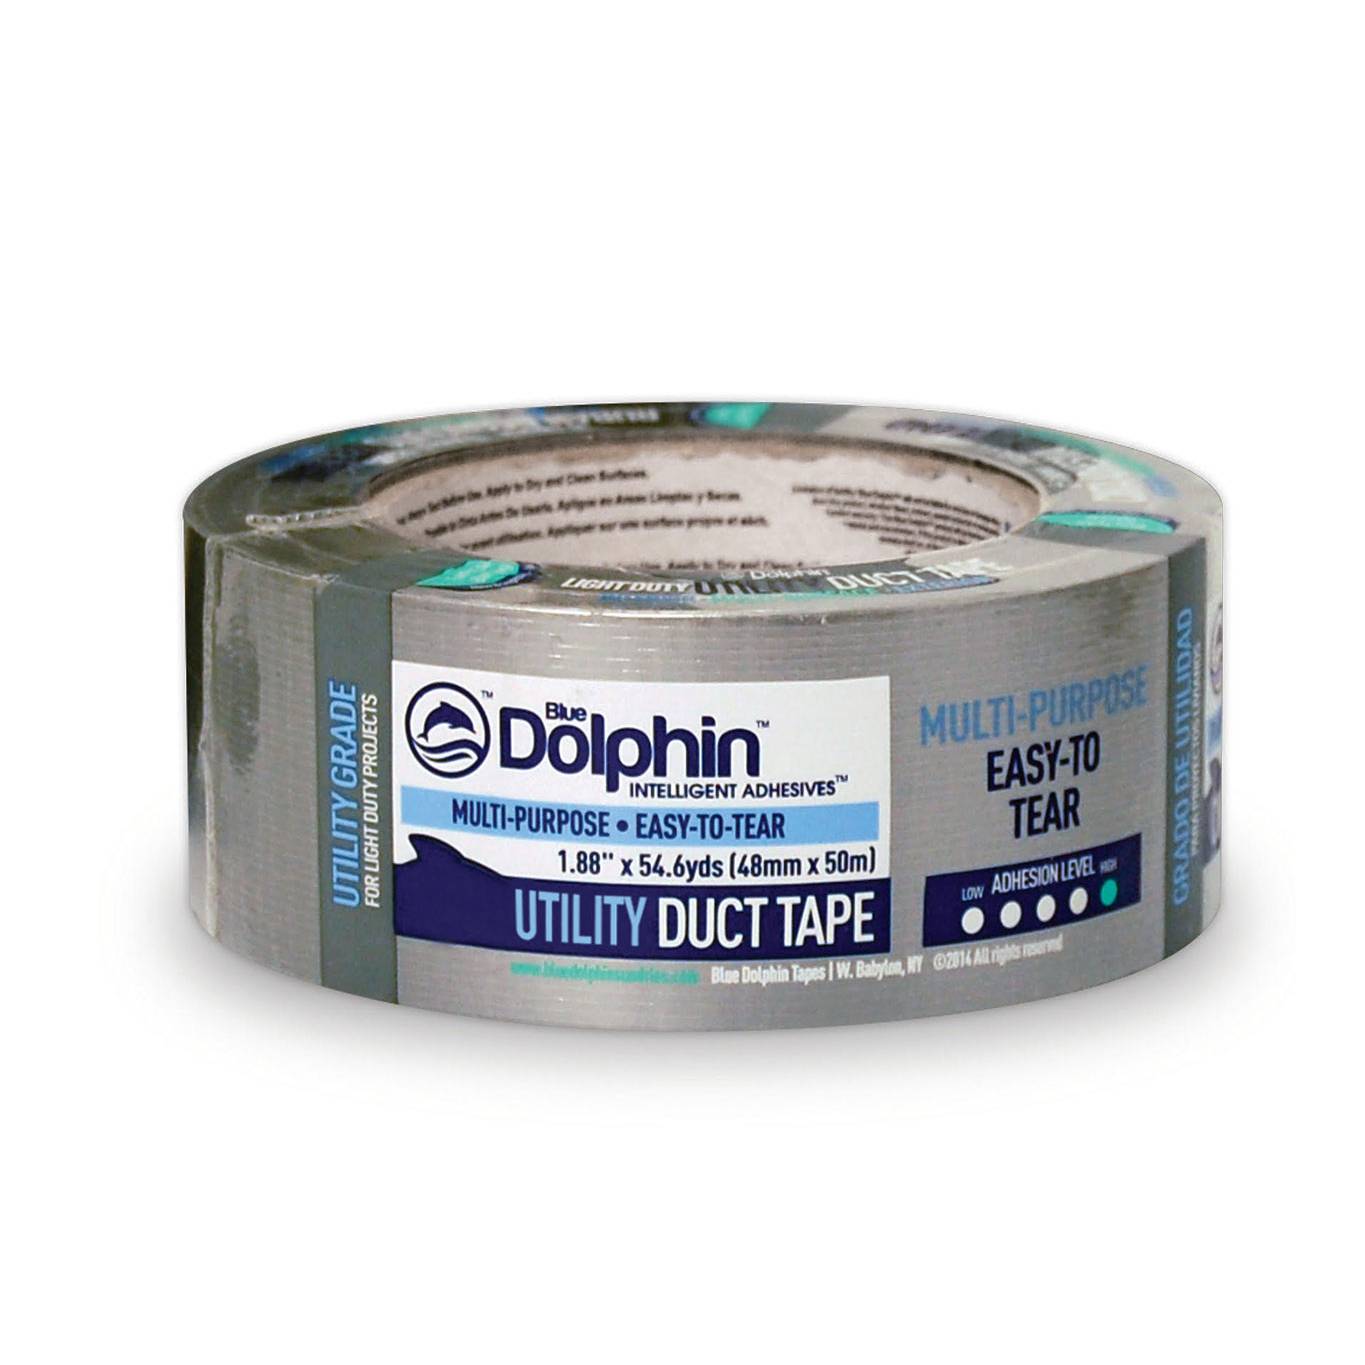 Utility Duct Tape 2" x 50m